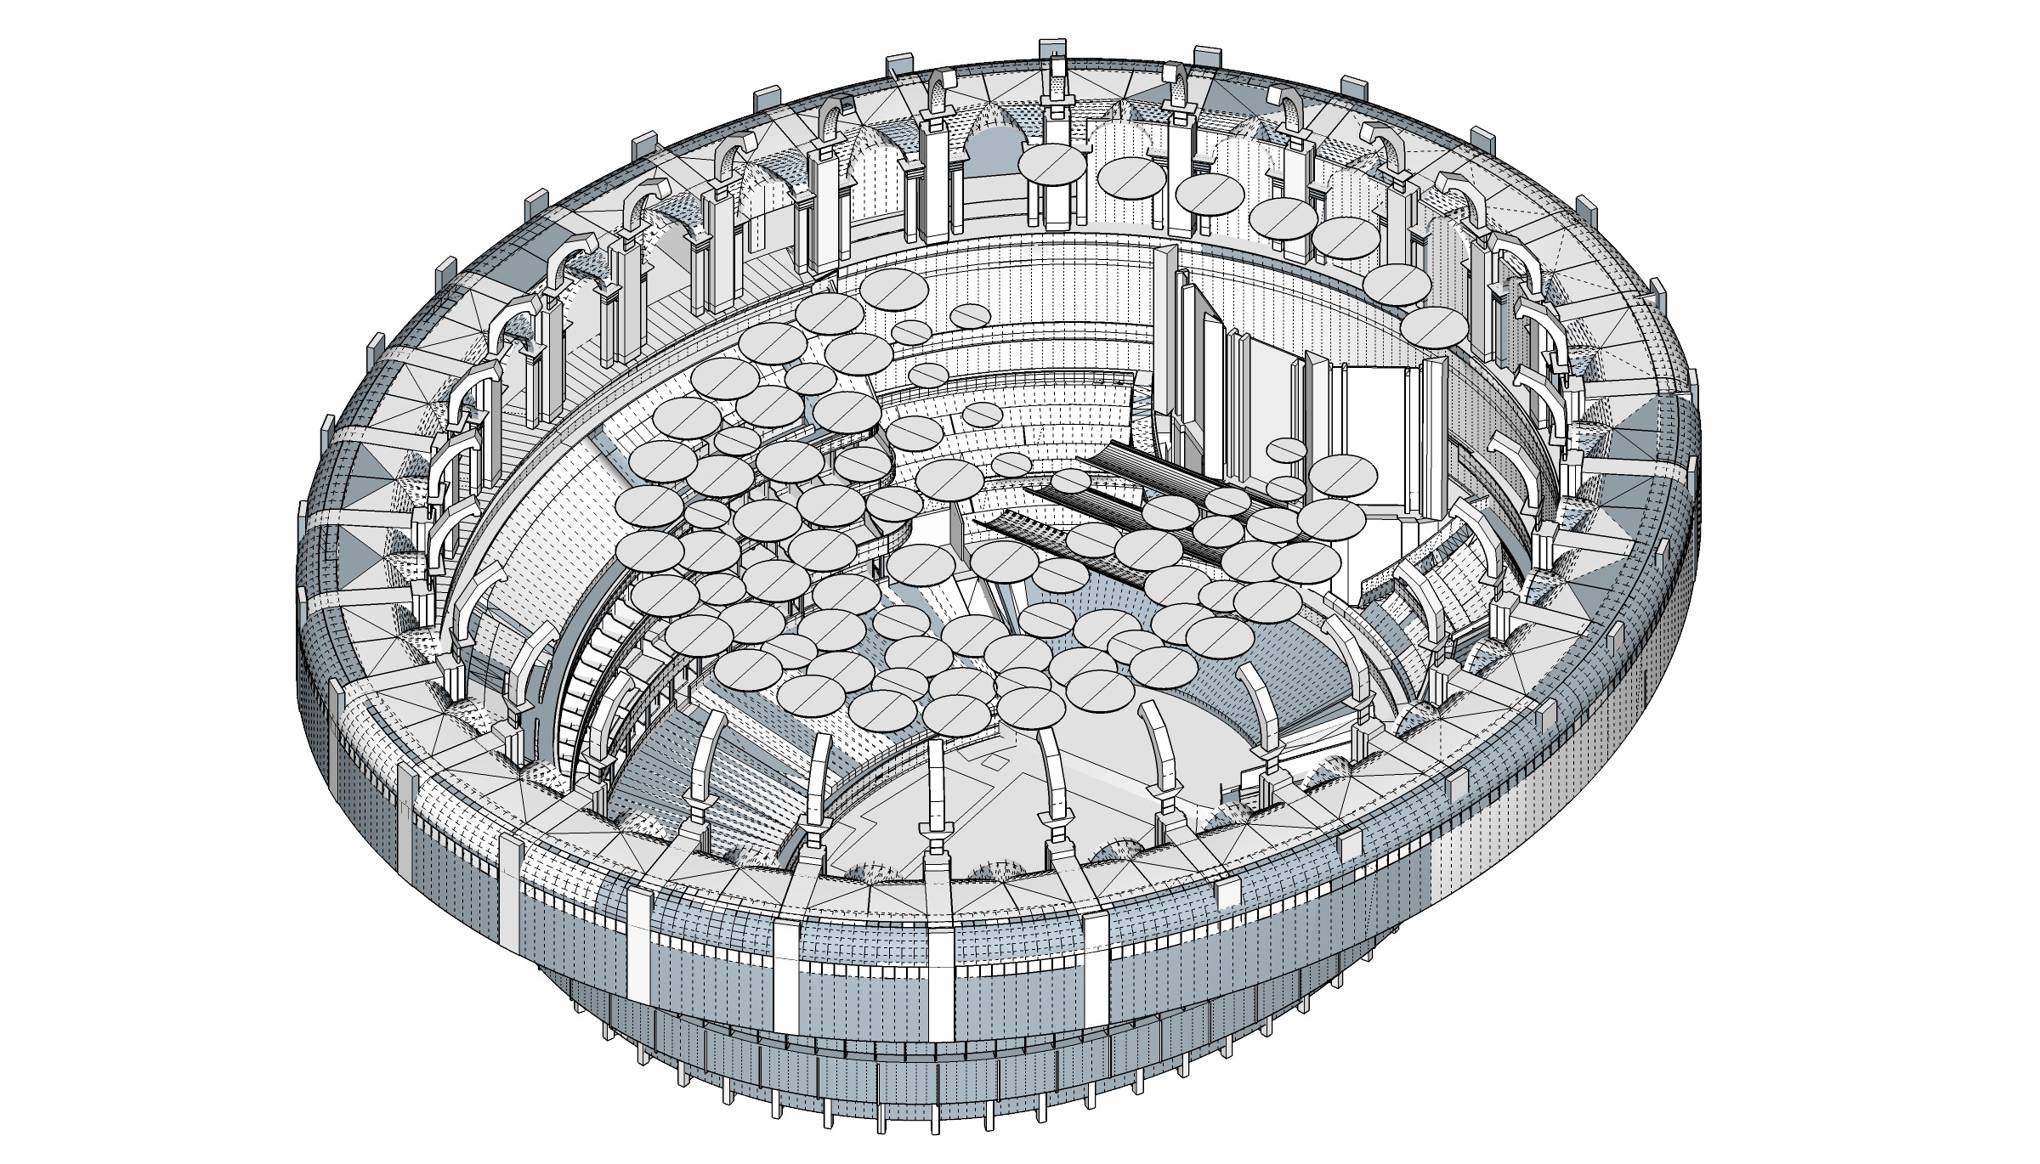 How The Royal Albert Hall Was Redesigned To Fix Its Dreaded Echo